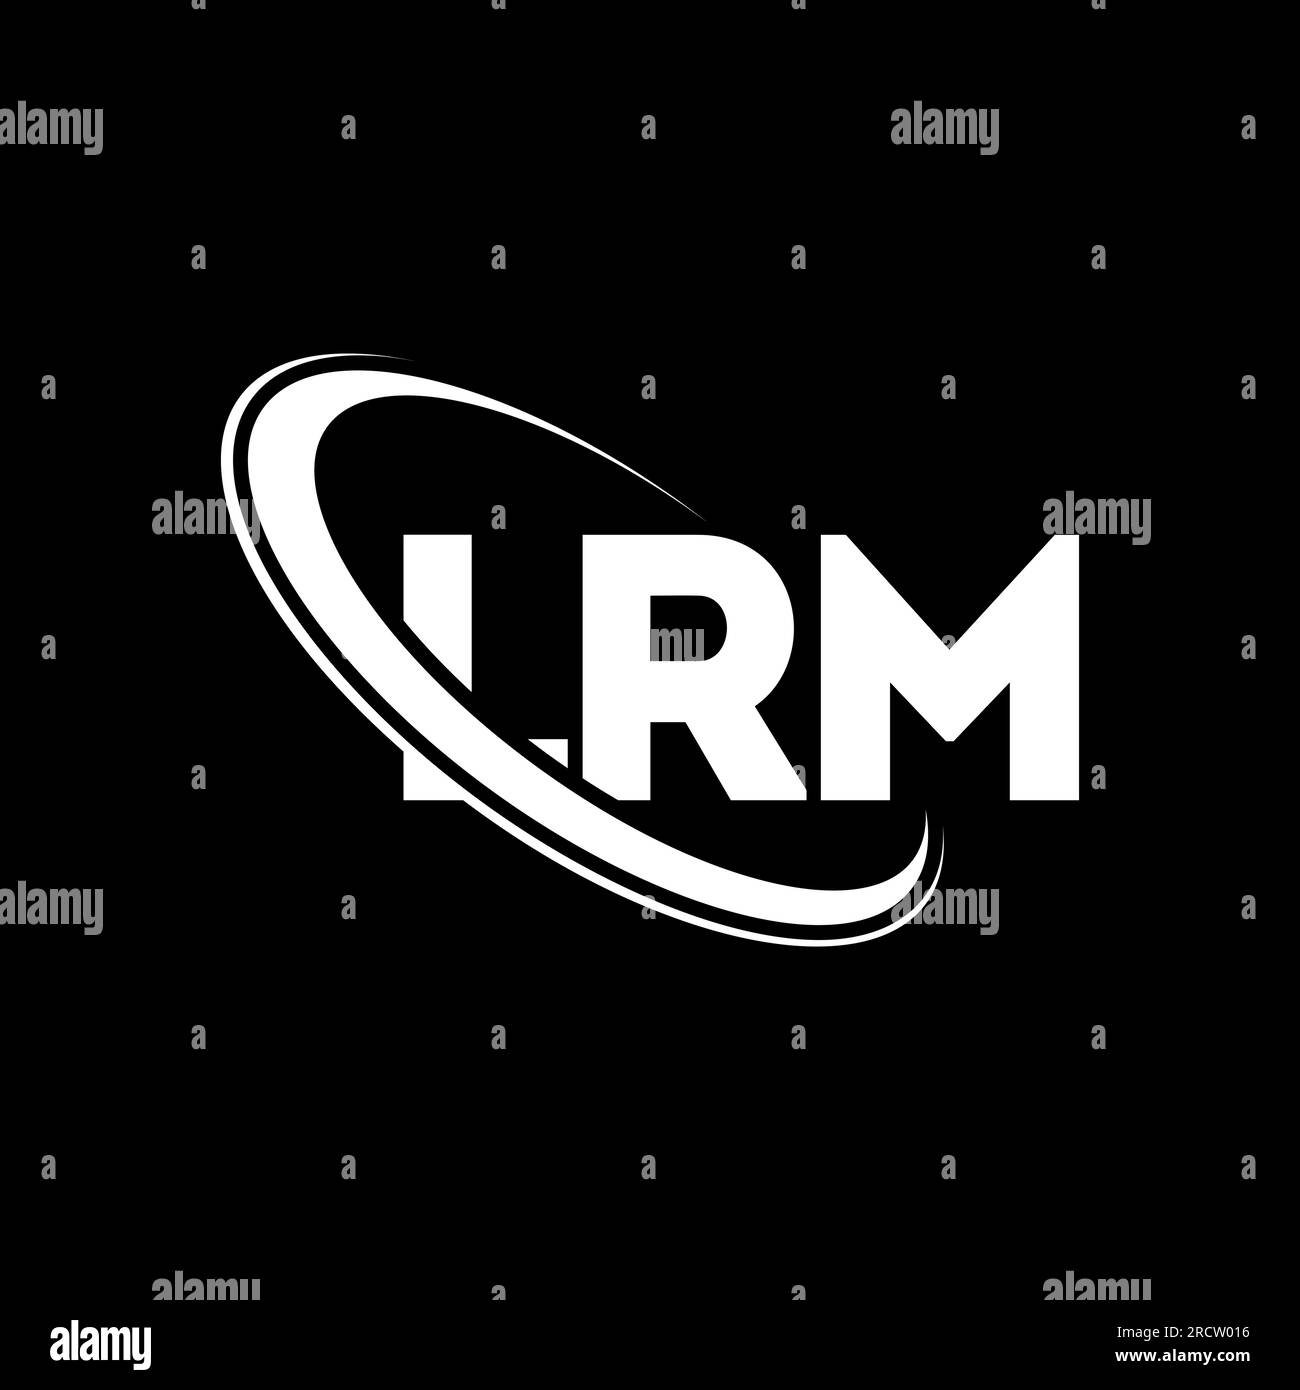 LRM logo. LRM letter. LRM letter logo design. Initials LRM logo linked with circle and uppercase monogram logo. LRM typography for technology, busines Stock Vector